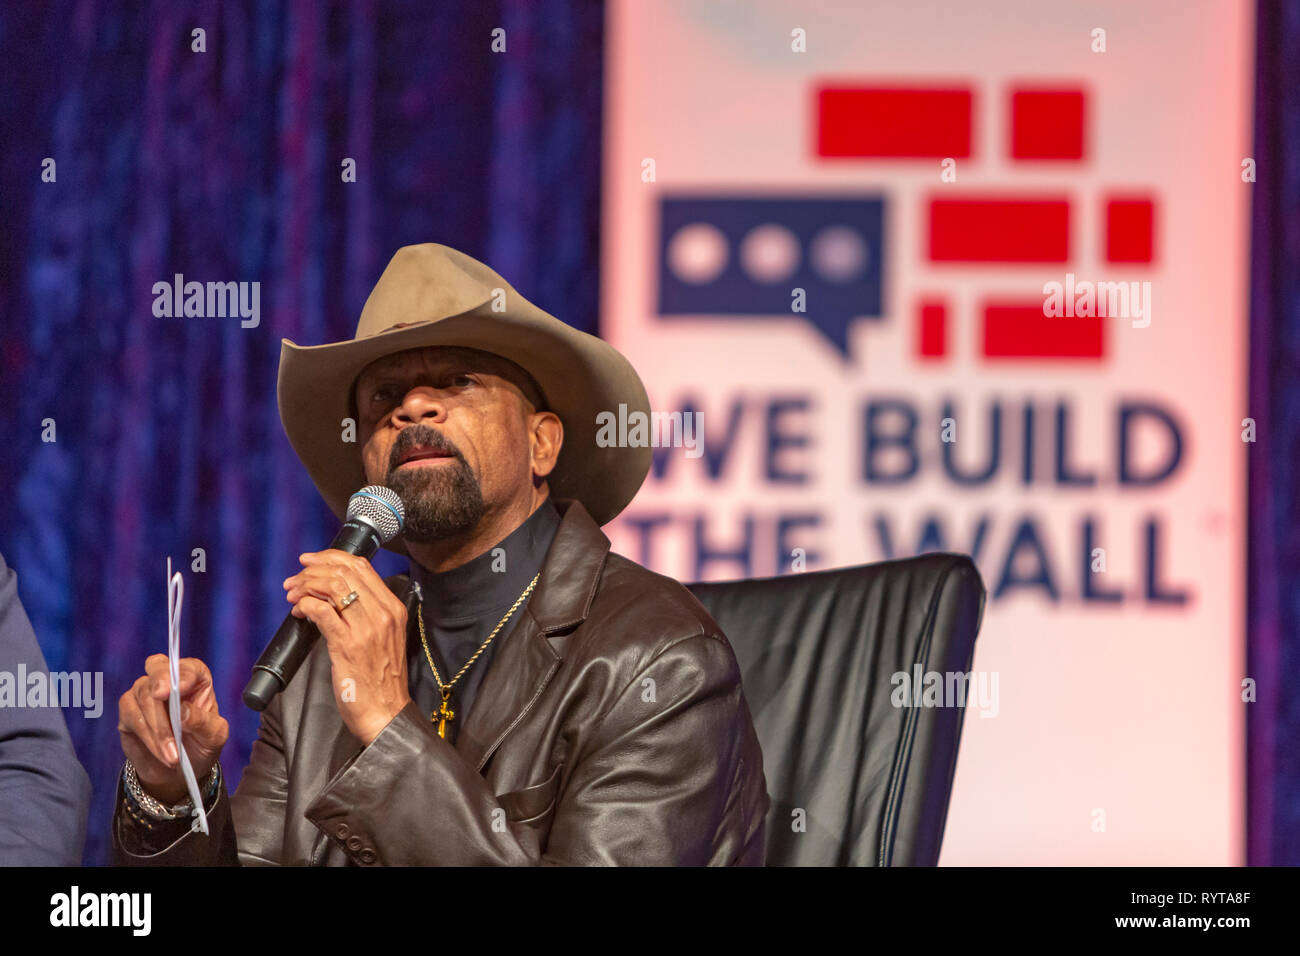 Detroit, Michigan USA - 14 March 2019 - Former Milwaukee County Sheriff David Clarke and other immigration hard liners held a public meeting to promote construction of a wall along the Mexican border. The 'We Build the Wall' event promoted an organization of the same name that is trying to raise individual contributions to fund wall construction. Credit: Jim West/Alamy Live News Stock Photo